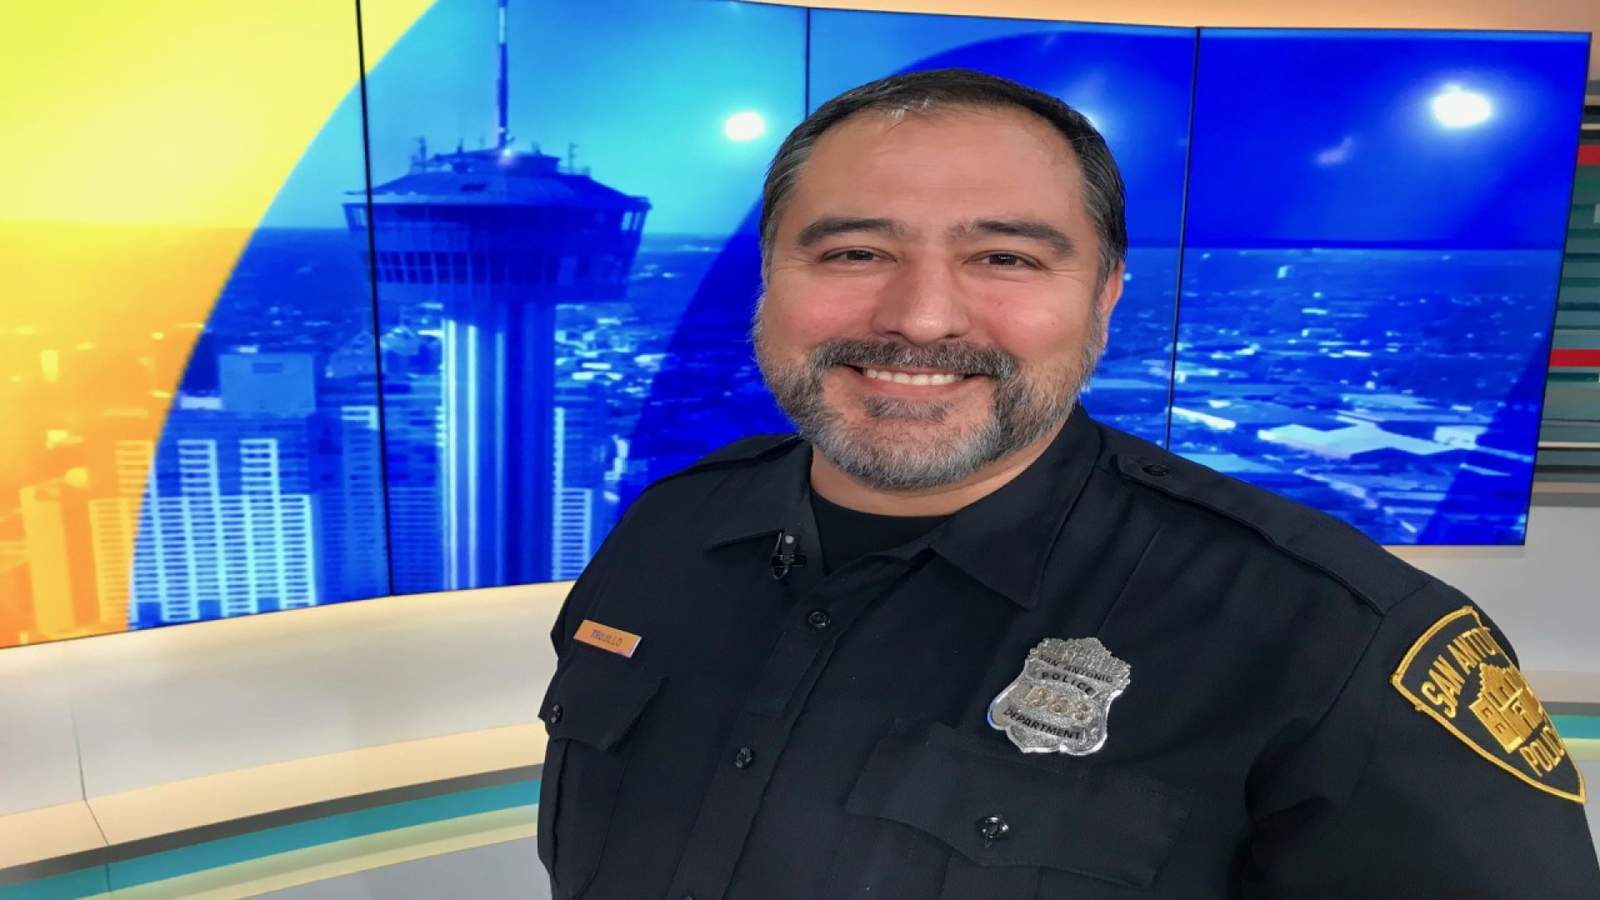 WATCH: After 14 years, Officer Marcus Trujillo says goodbye to GMSA